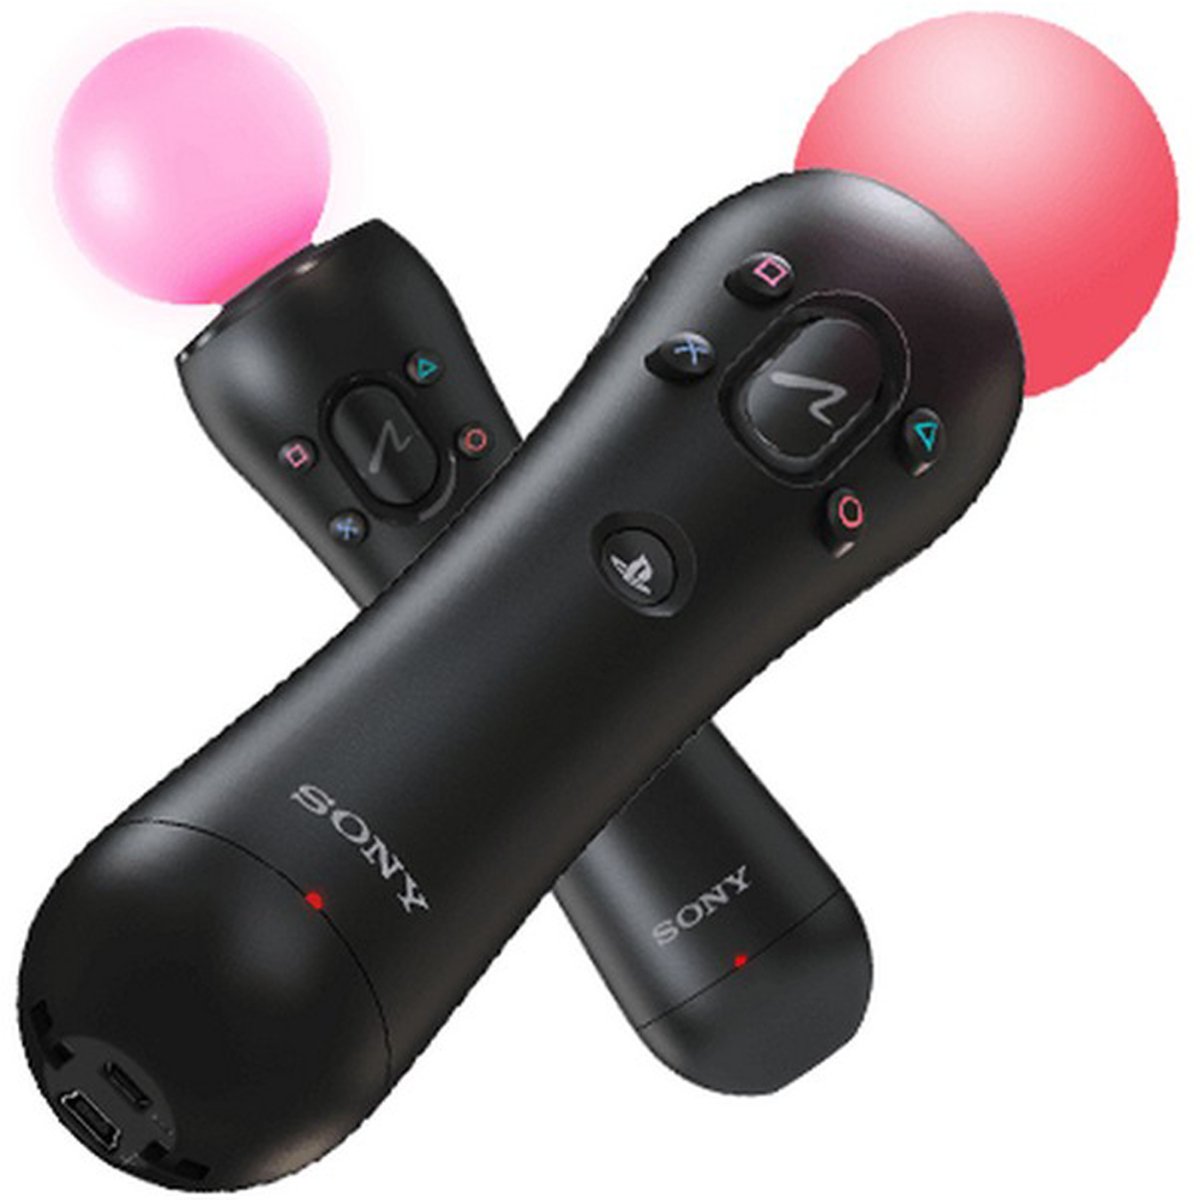 Sony PS4 Move Motion Controller Twin Pack for VR